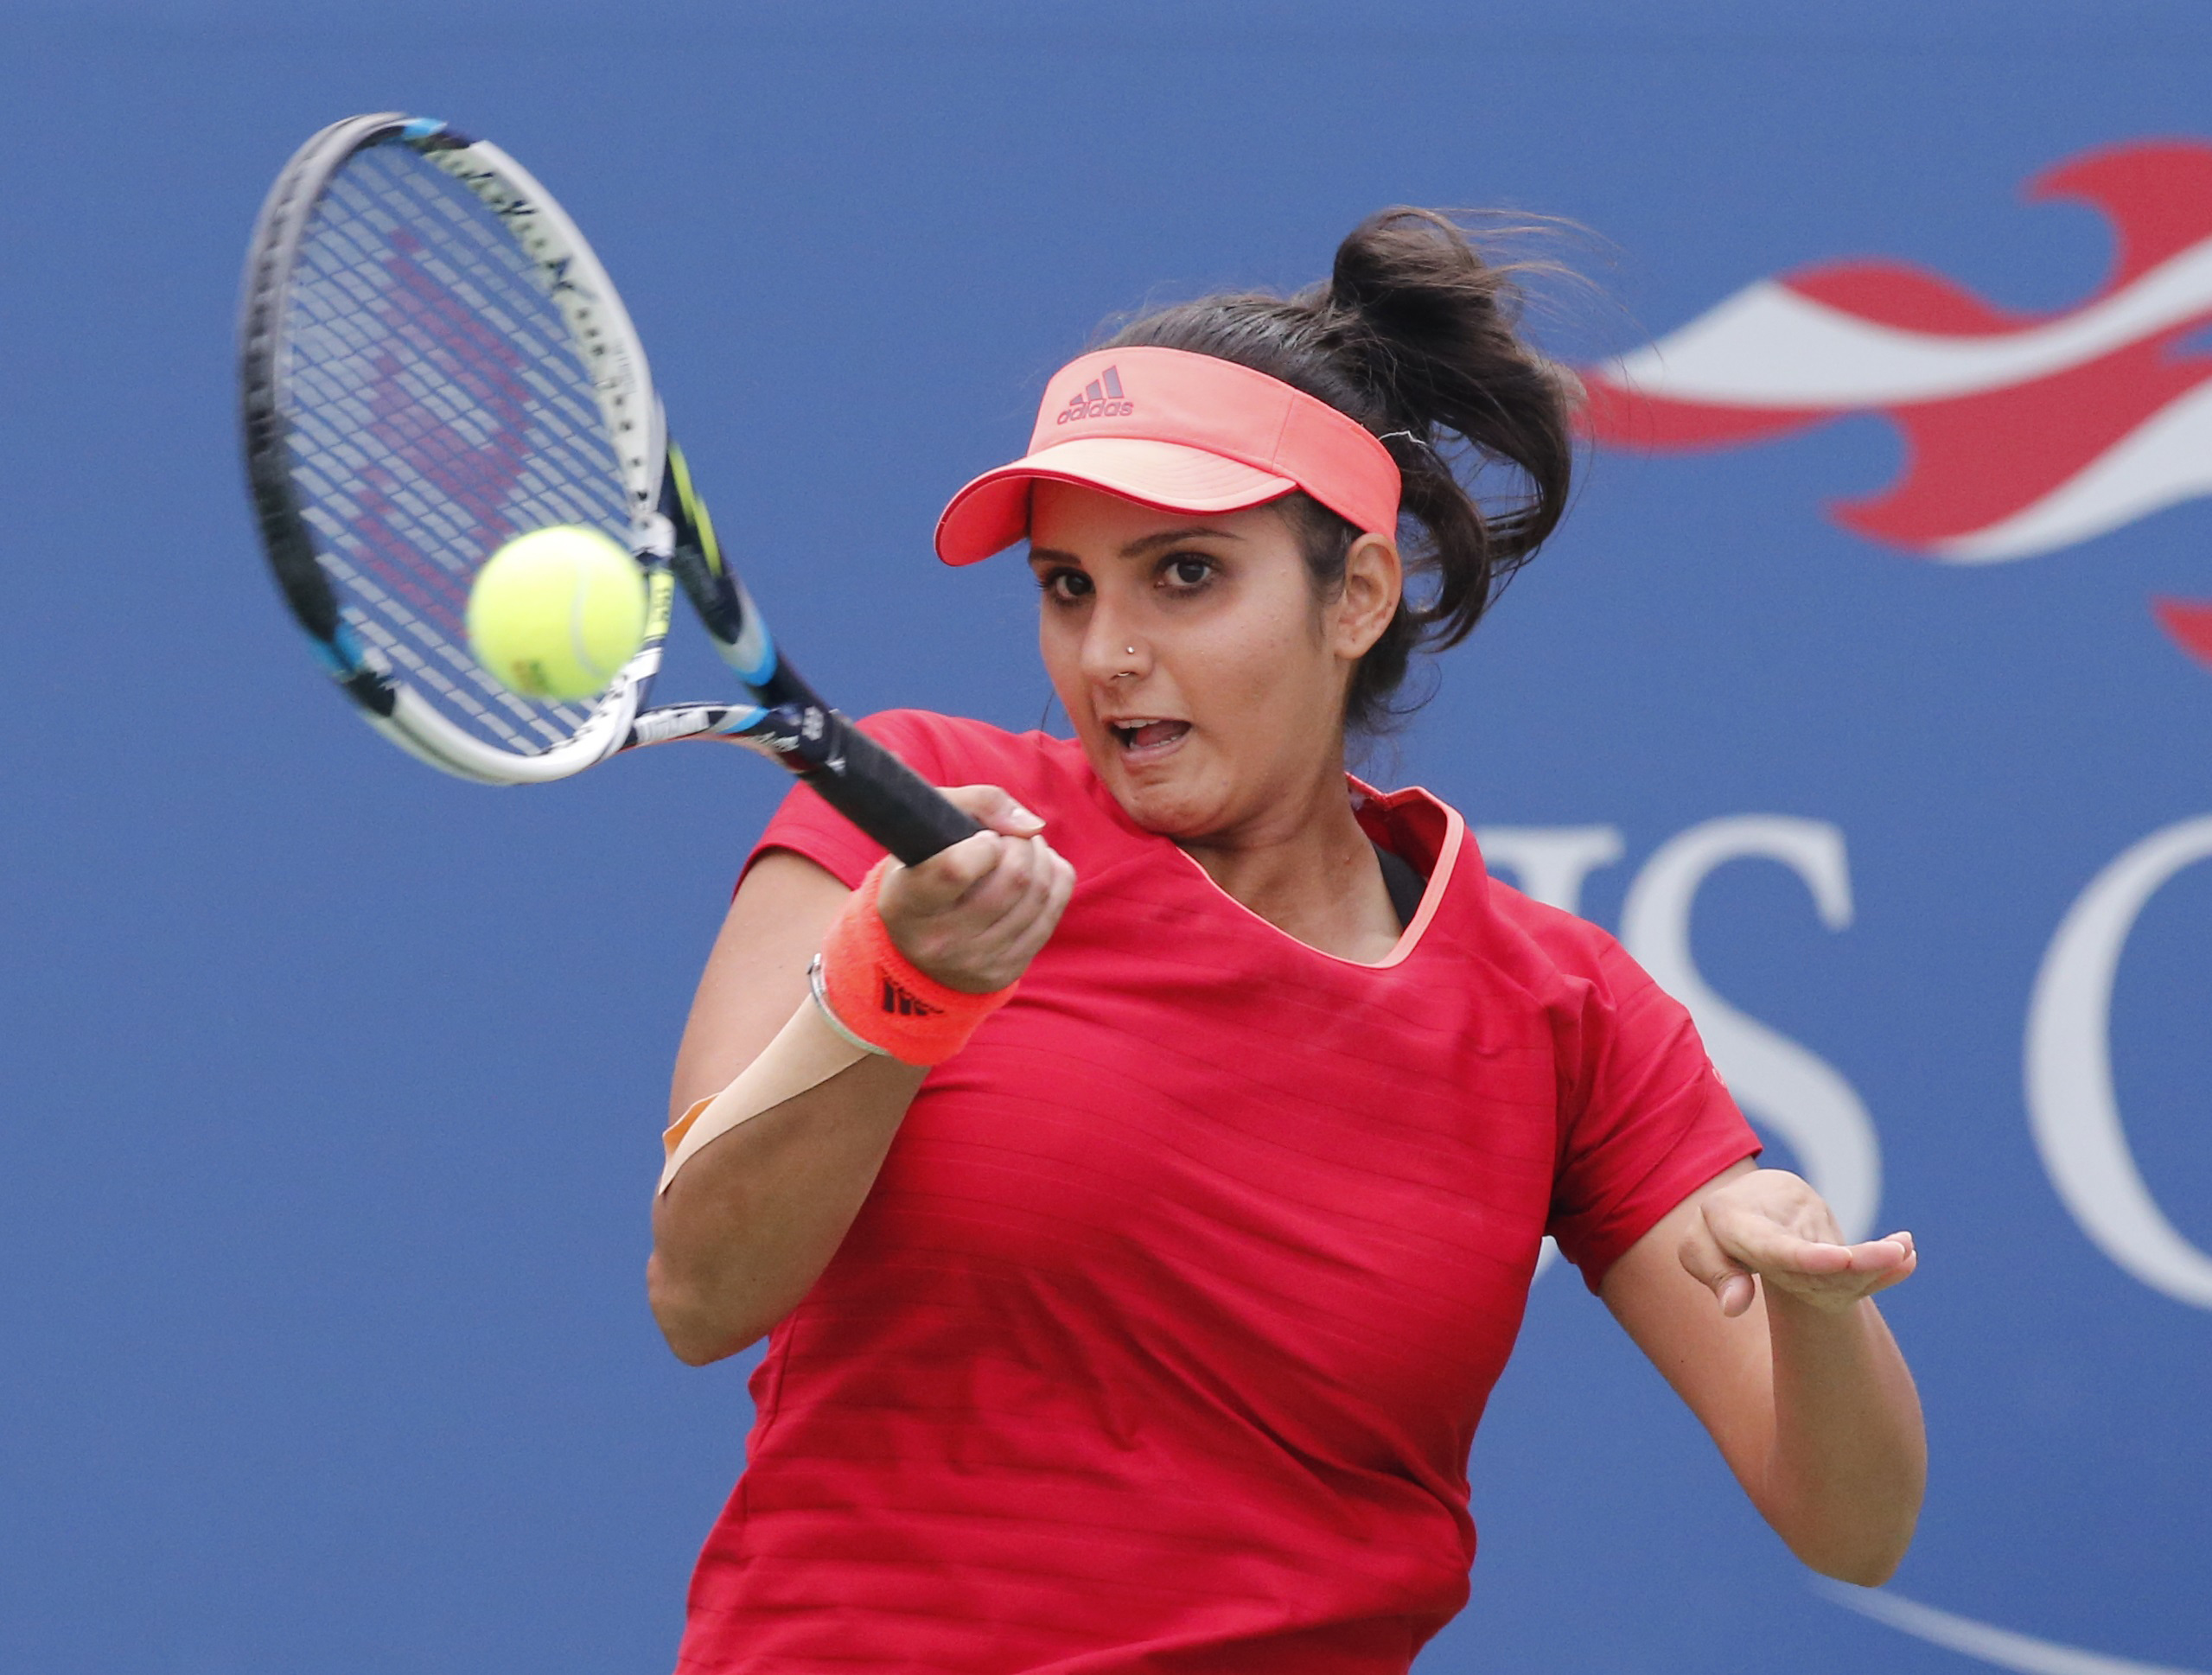 Mirza of India returns with playing partner Hingis of Switzerland as they face Dellacqua of Australia and Shvedova of Kazakhstan in the women's doubles final match at the U.S. Open Championships tennis tournament in New York